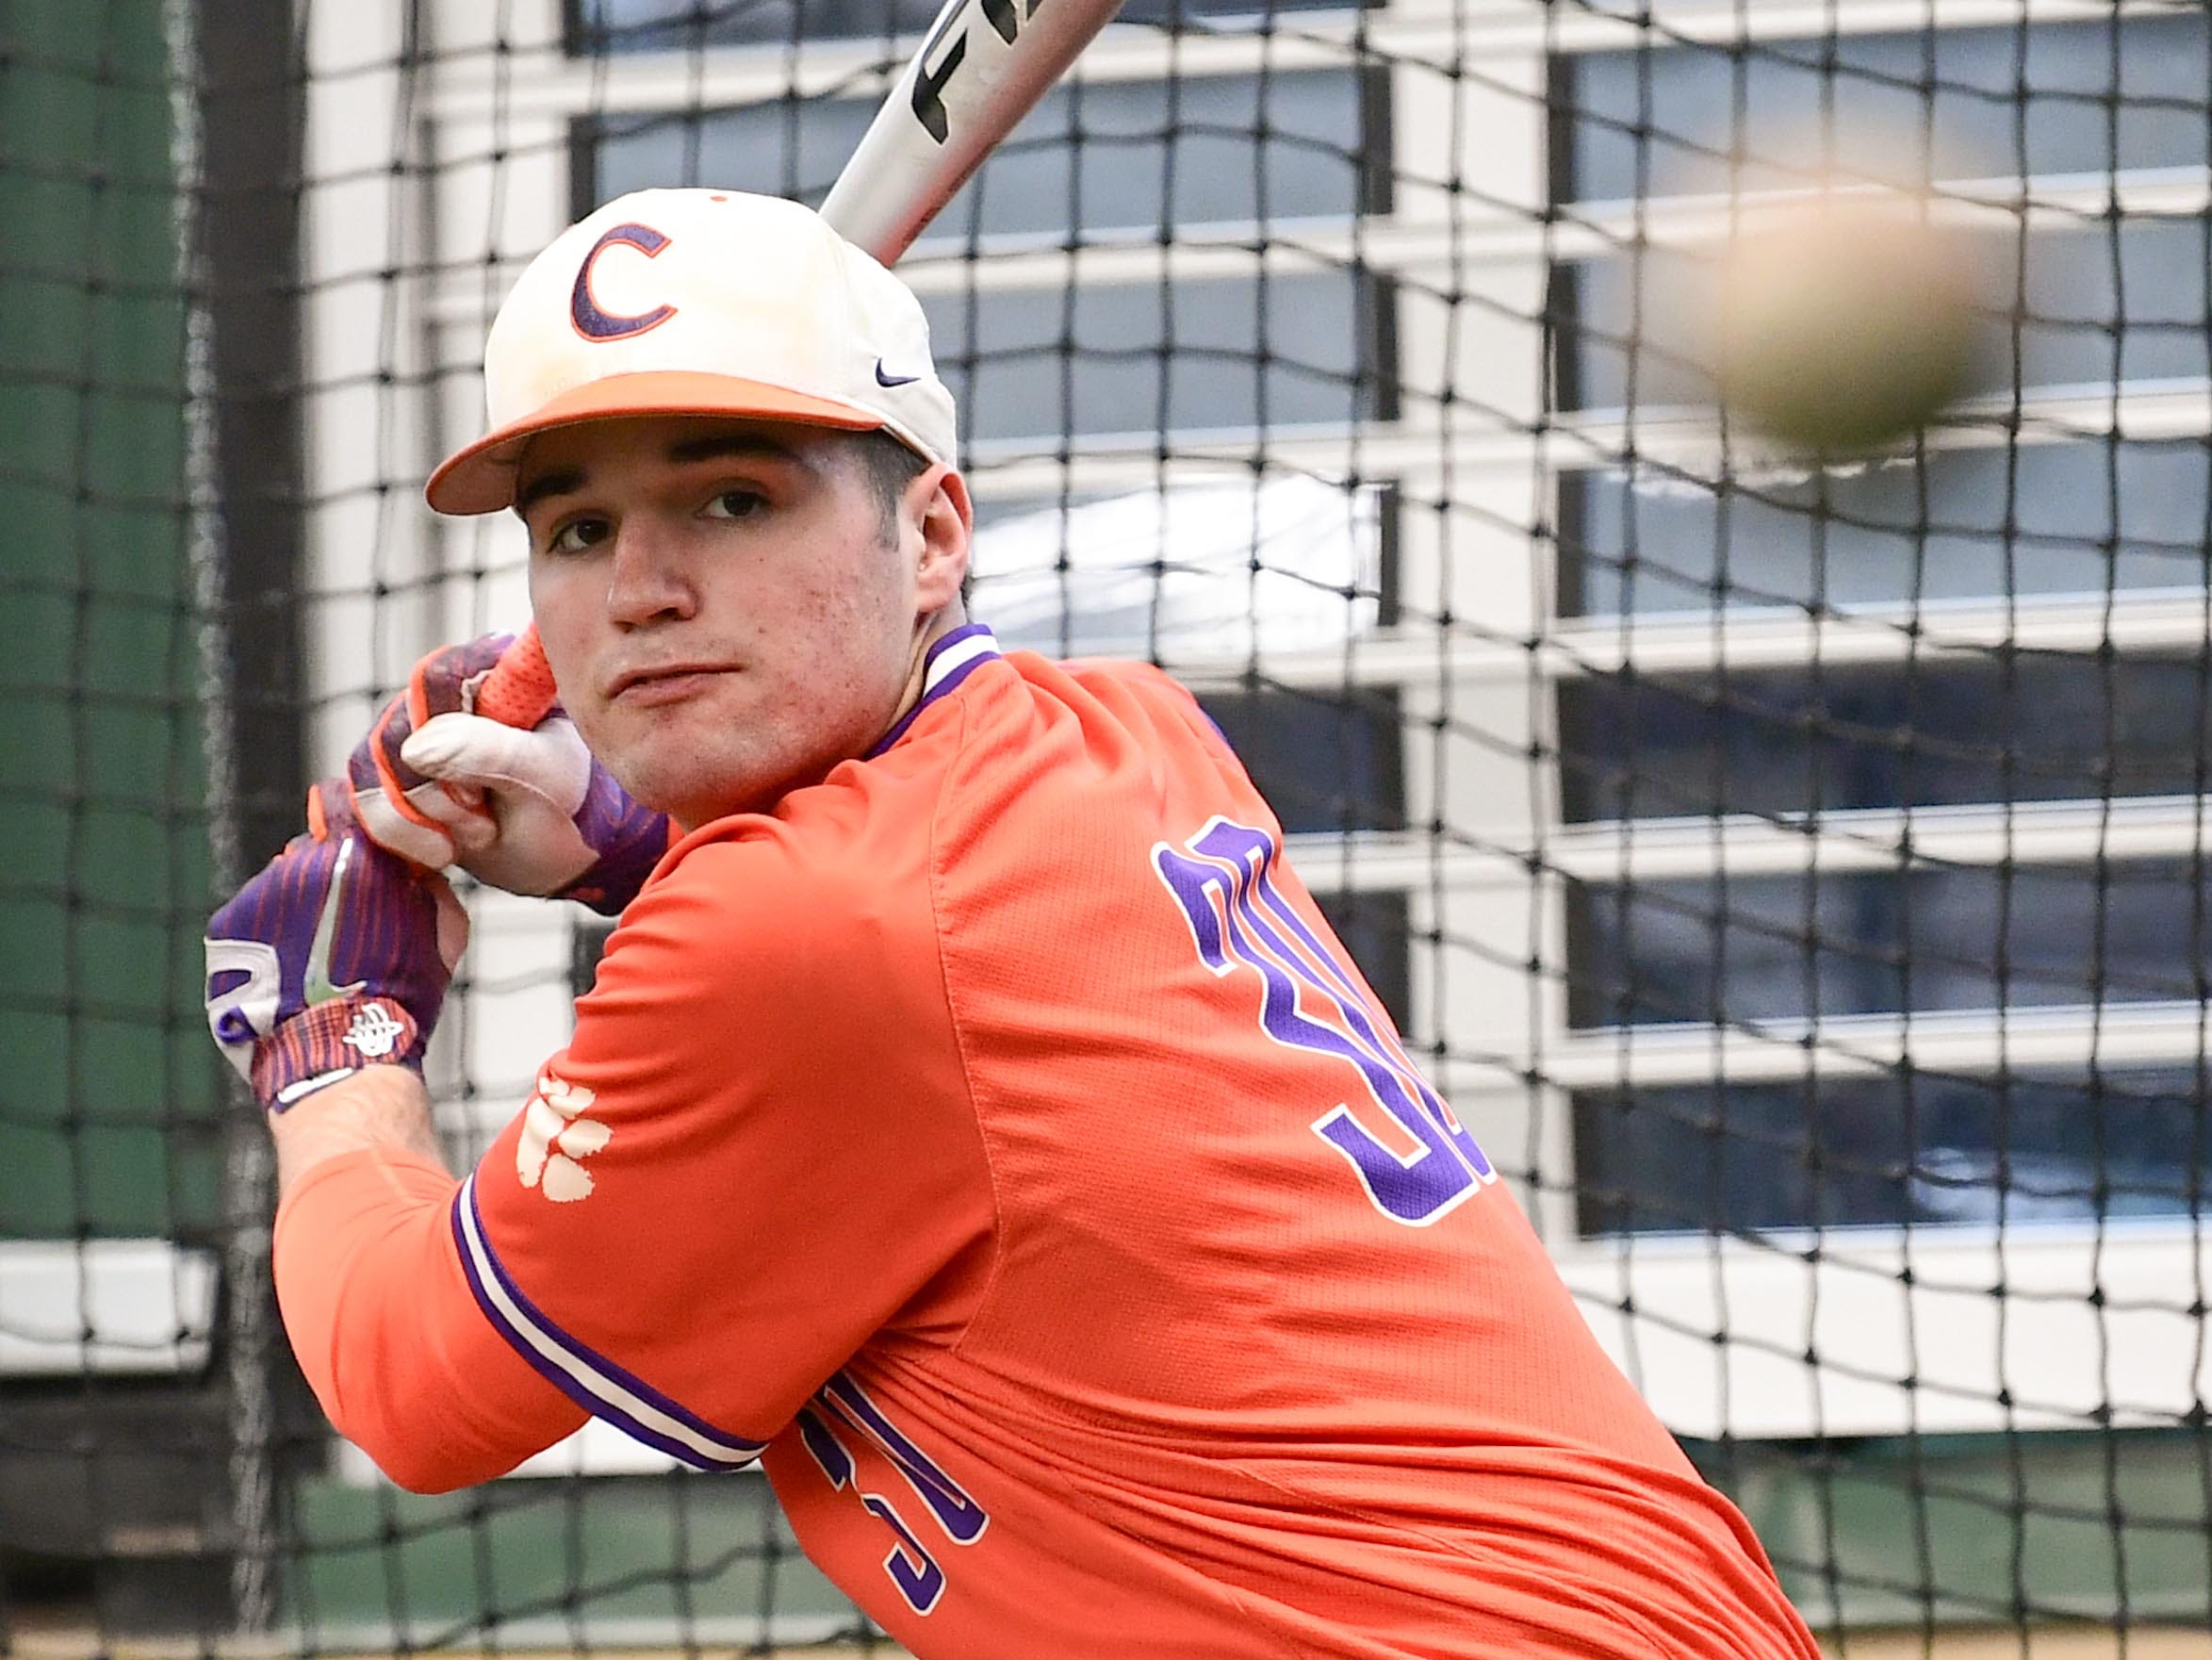 Clemson sophomore pitcher Davis Sharpe (30) during batting practice at the first official team Spring practice at Doug Kingsmore Stadium in Clemson Friday, January 24, 2020.